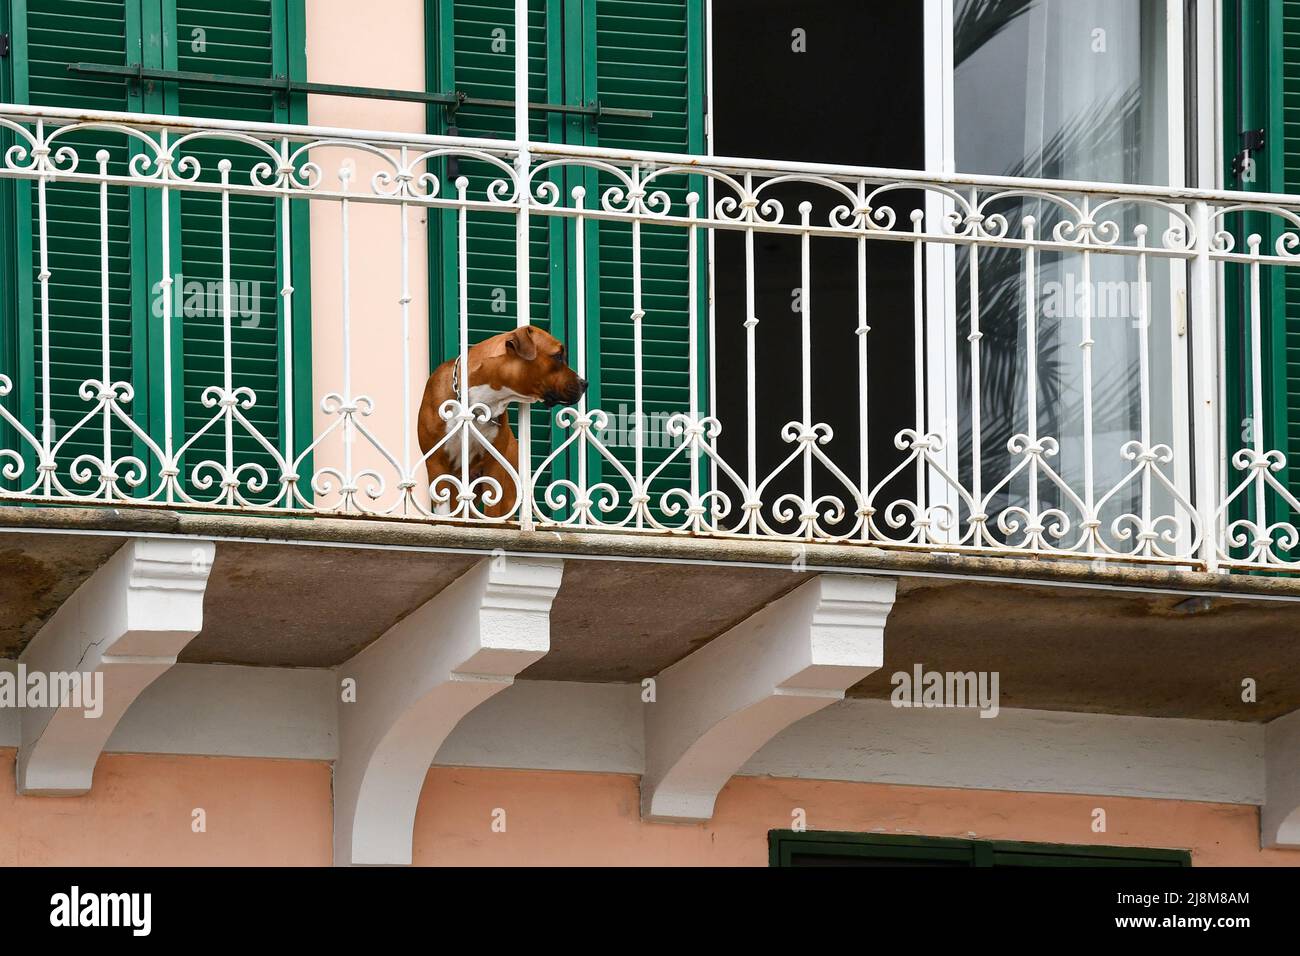 A brown and white dog overlooking a balcony with its head between the bars of the railing, Sanremo, Imperia, Liguria, Italy Stock Photo